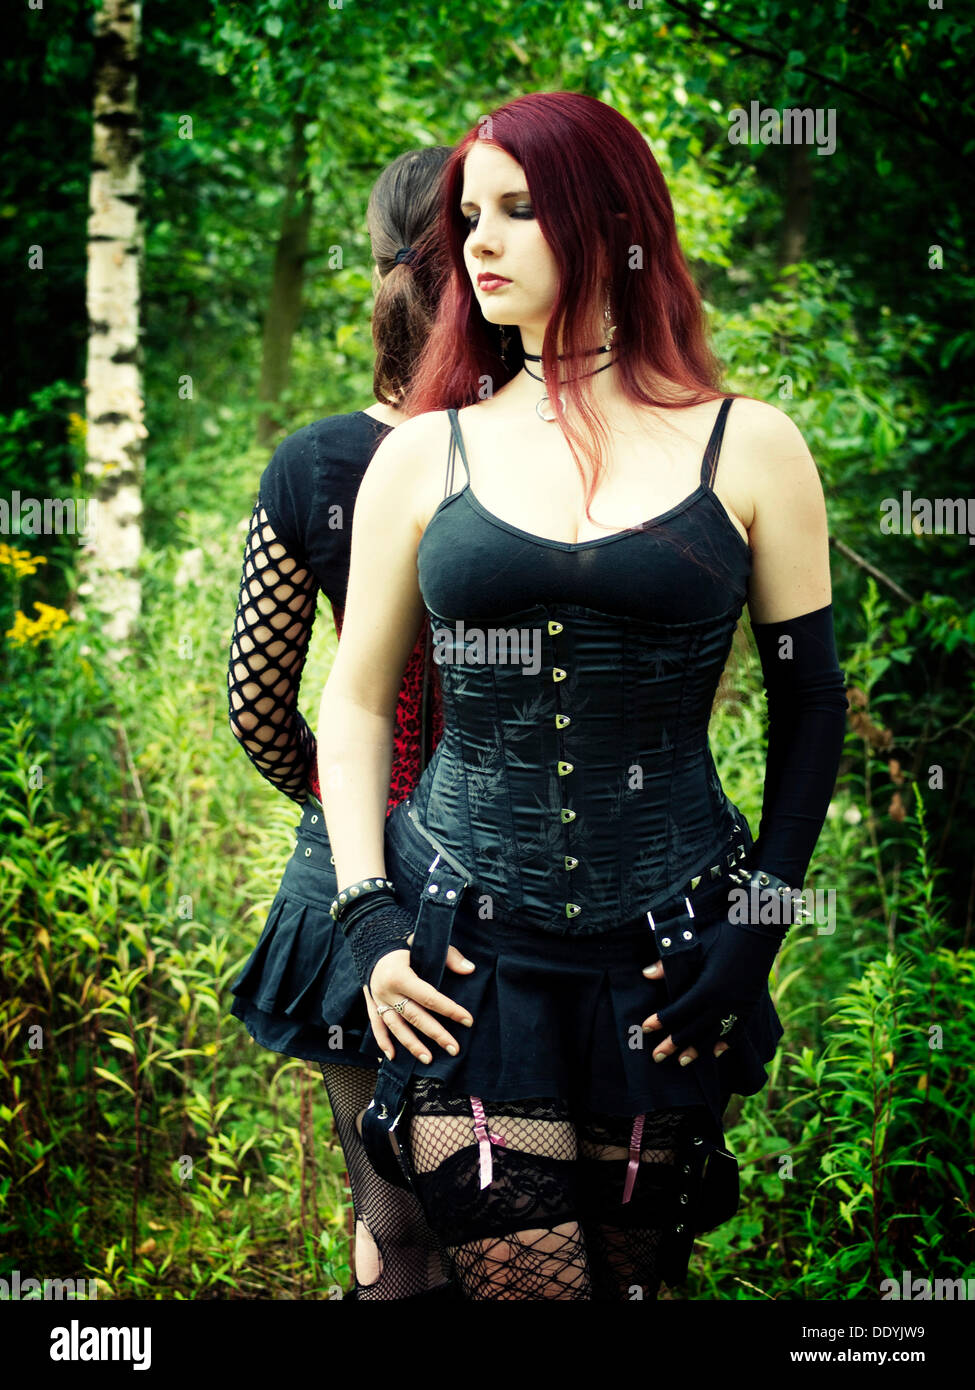 Women, dressed in a Gothic style, standing in a forest Stock Photo